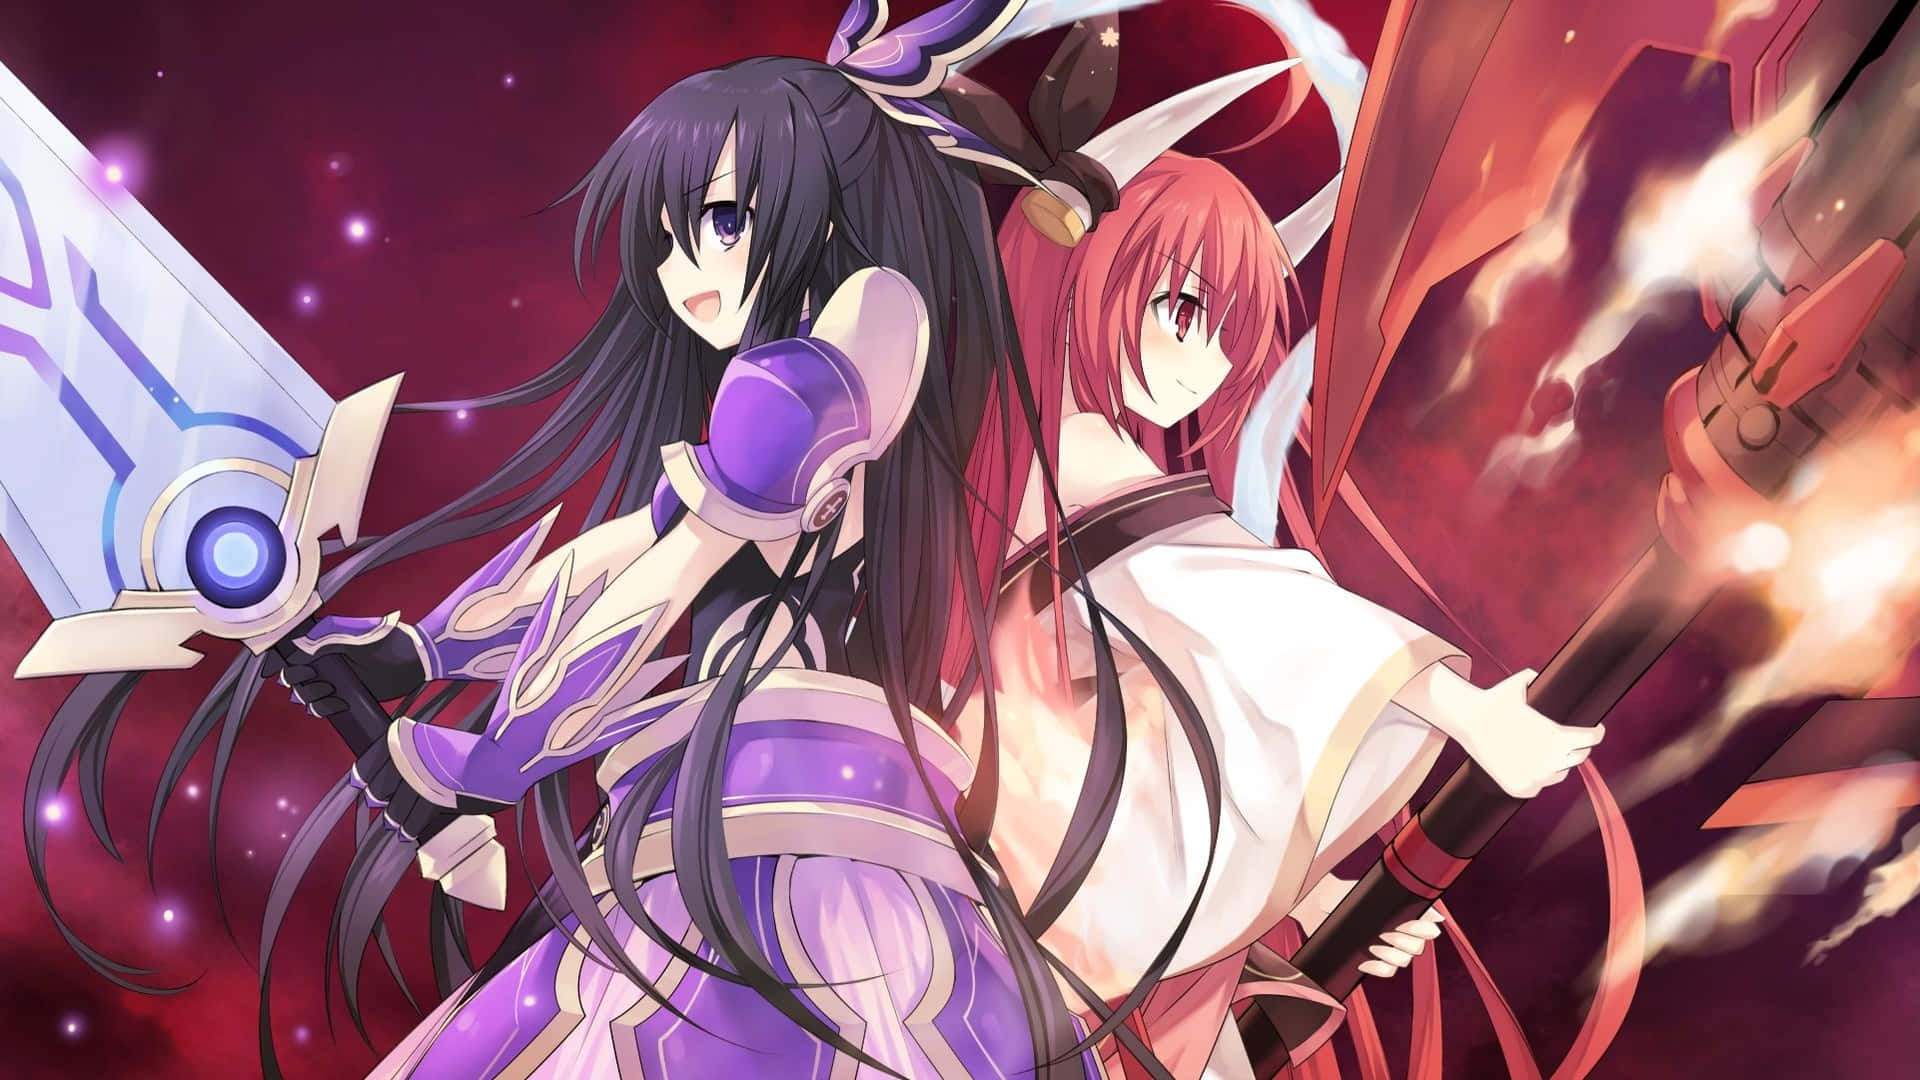 Date A Live Computer Wallpapers - Wallpaper Cave